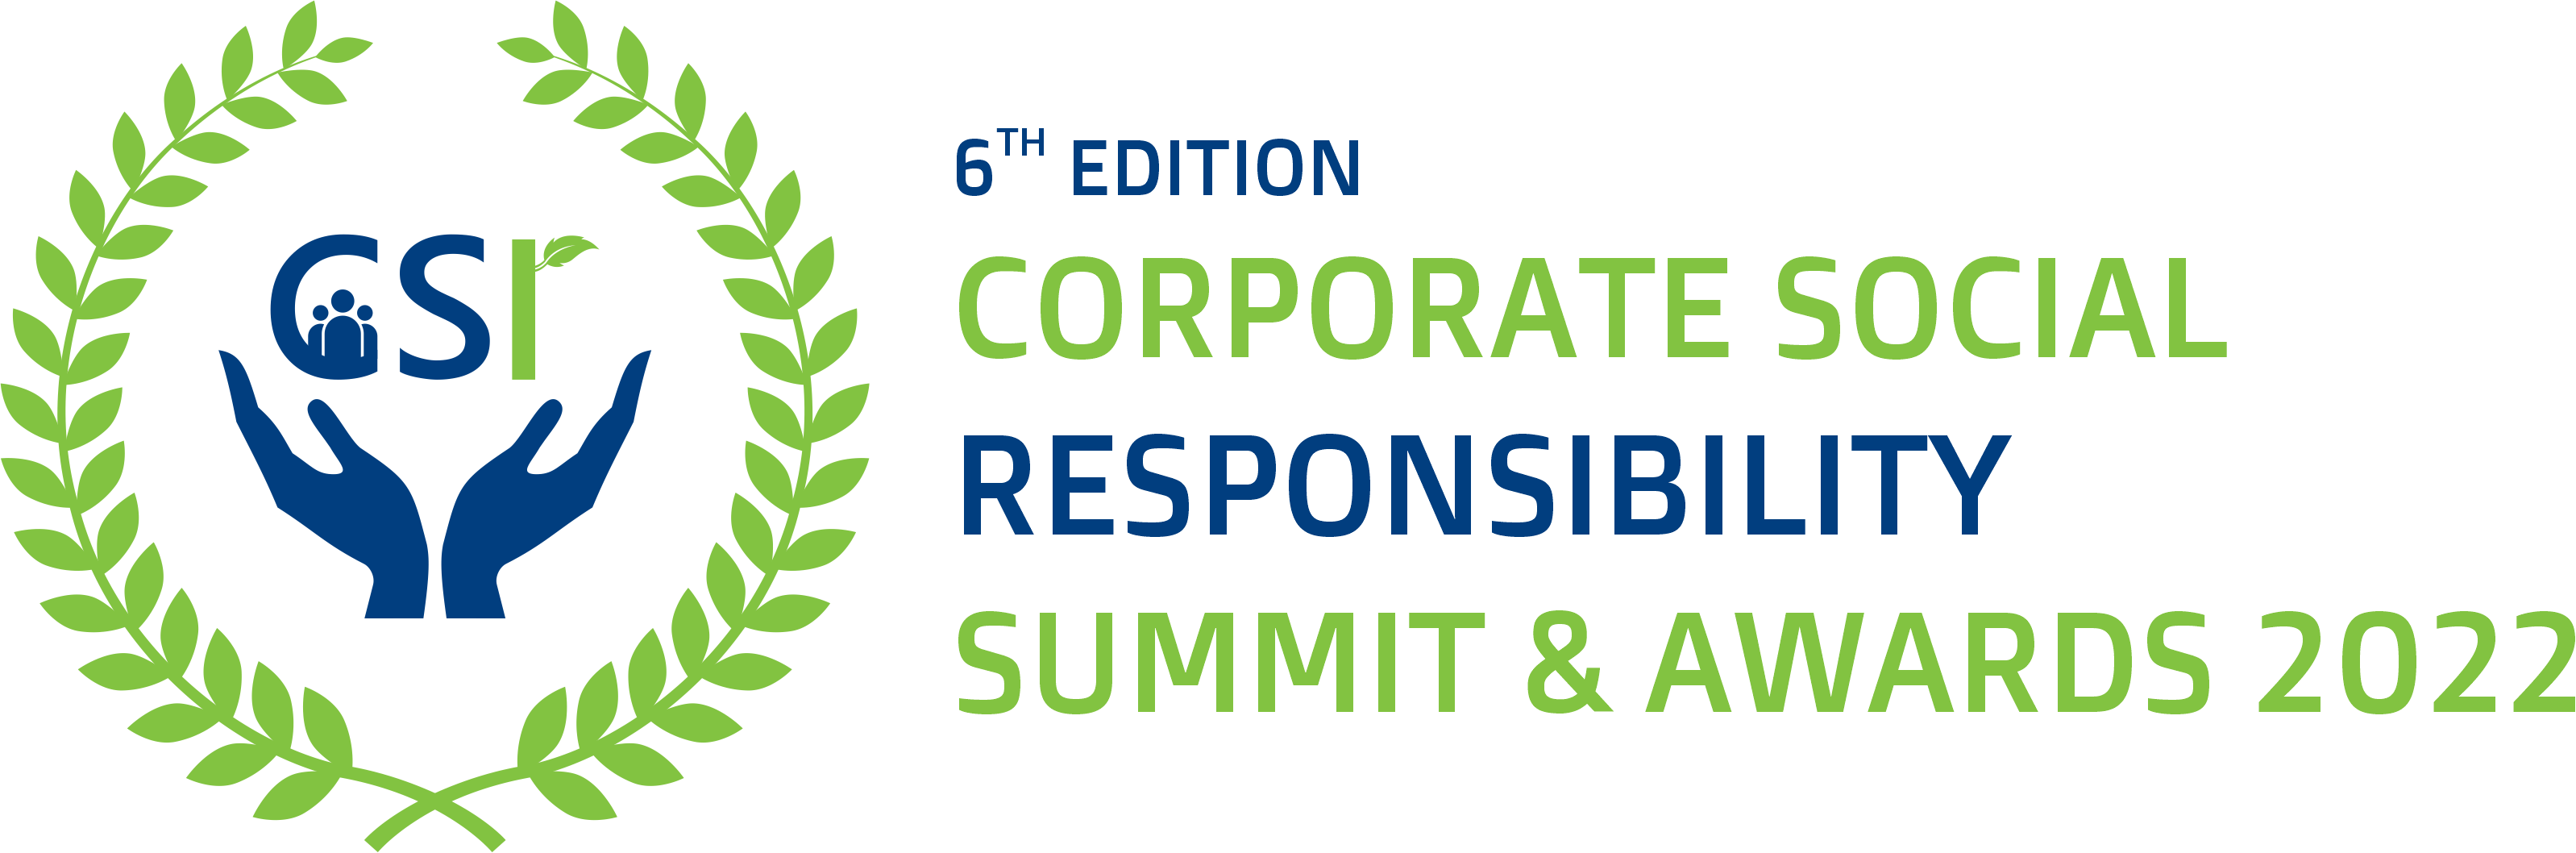 6th Edition Corporate Social Responsibility Summit and Awards 2022